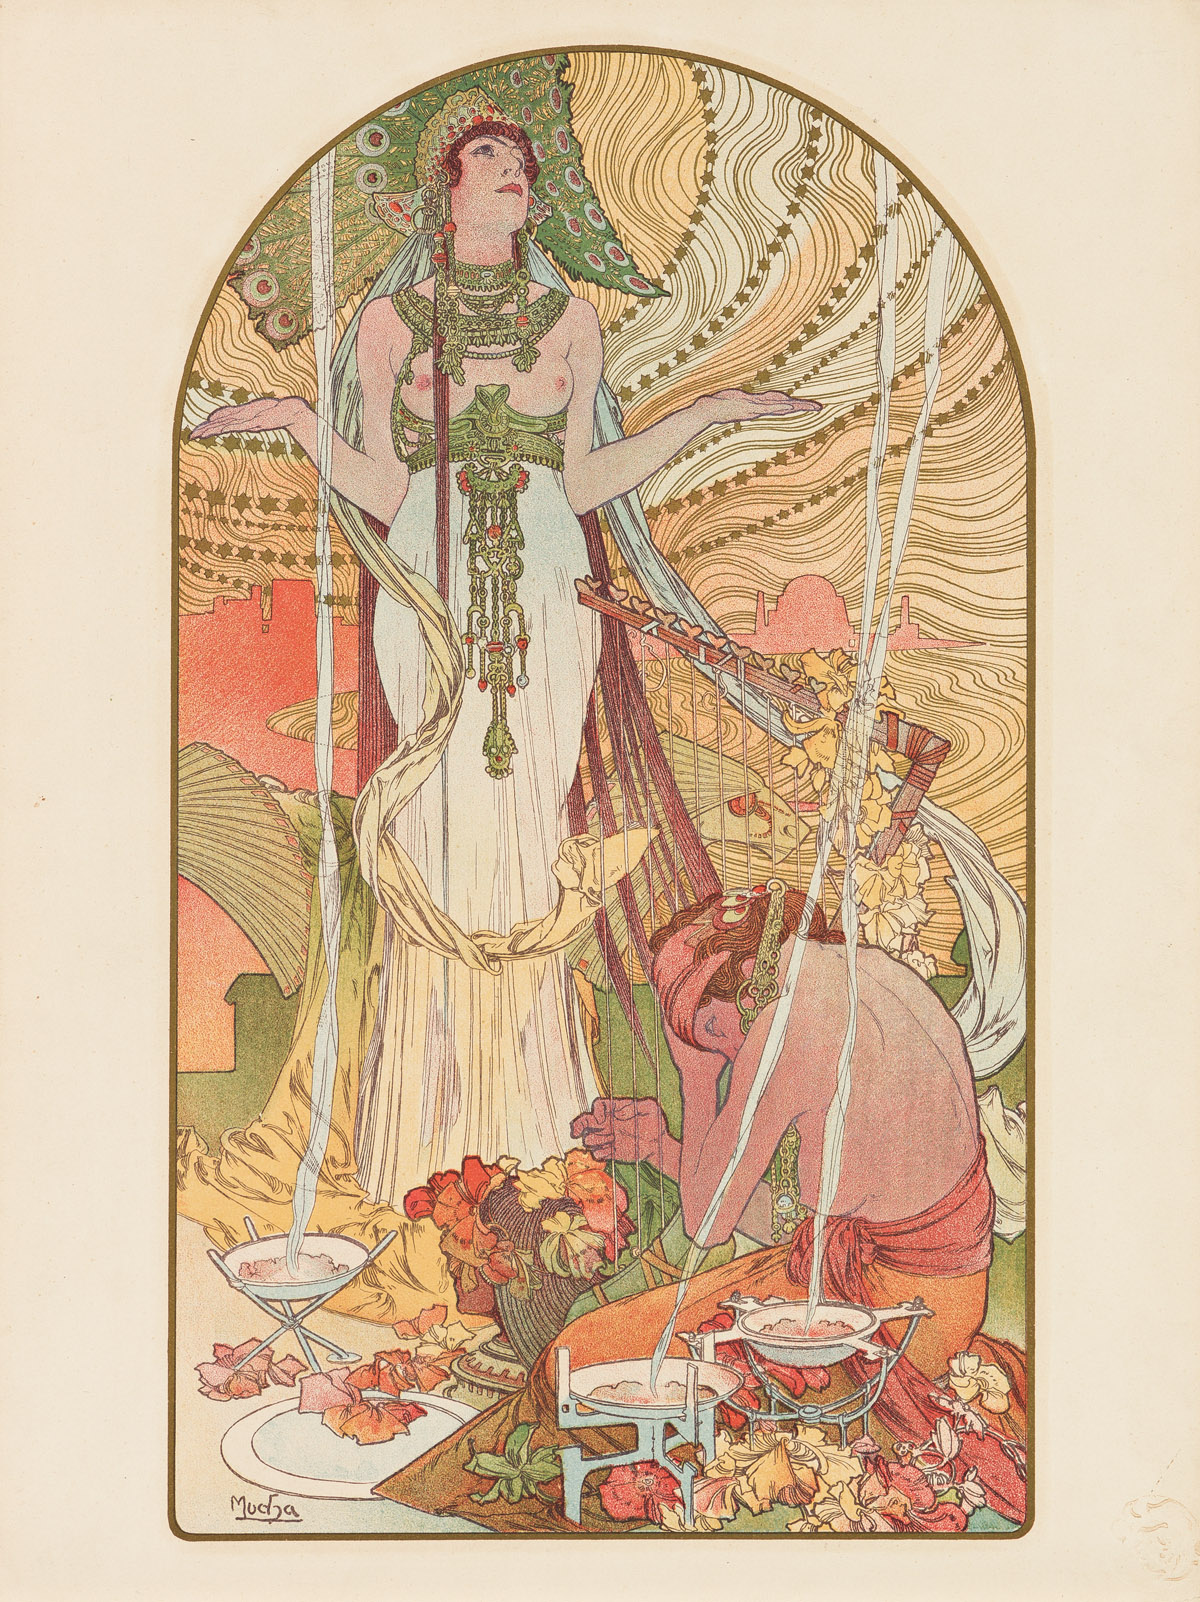 ALPHONSE MUCHA (1860-1939).  [INCANTATION.] Plate from LEstampe Moderne. 1897. 16x12¼ inches, 50½x31 cm. [Champenois, Paris.]